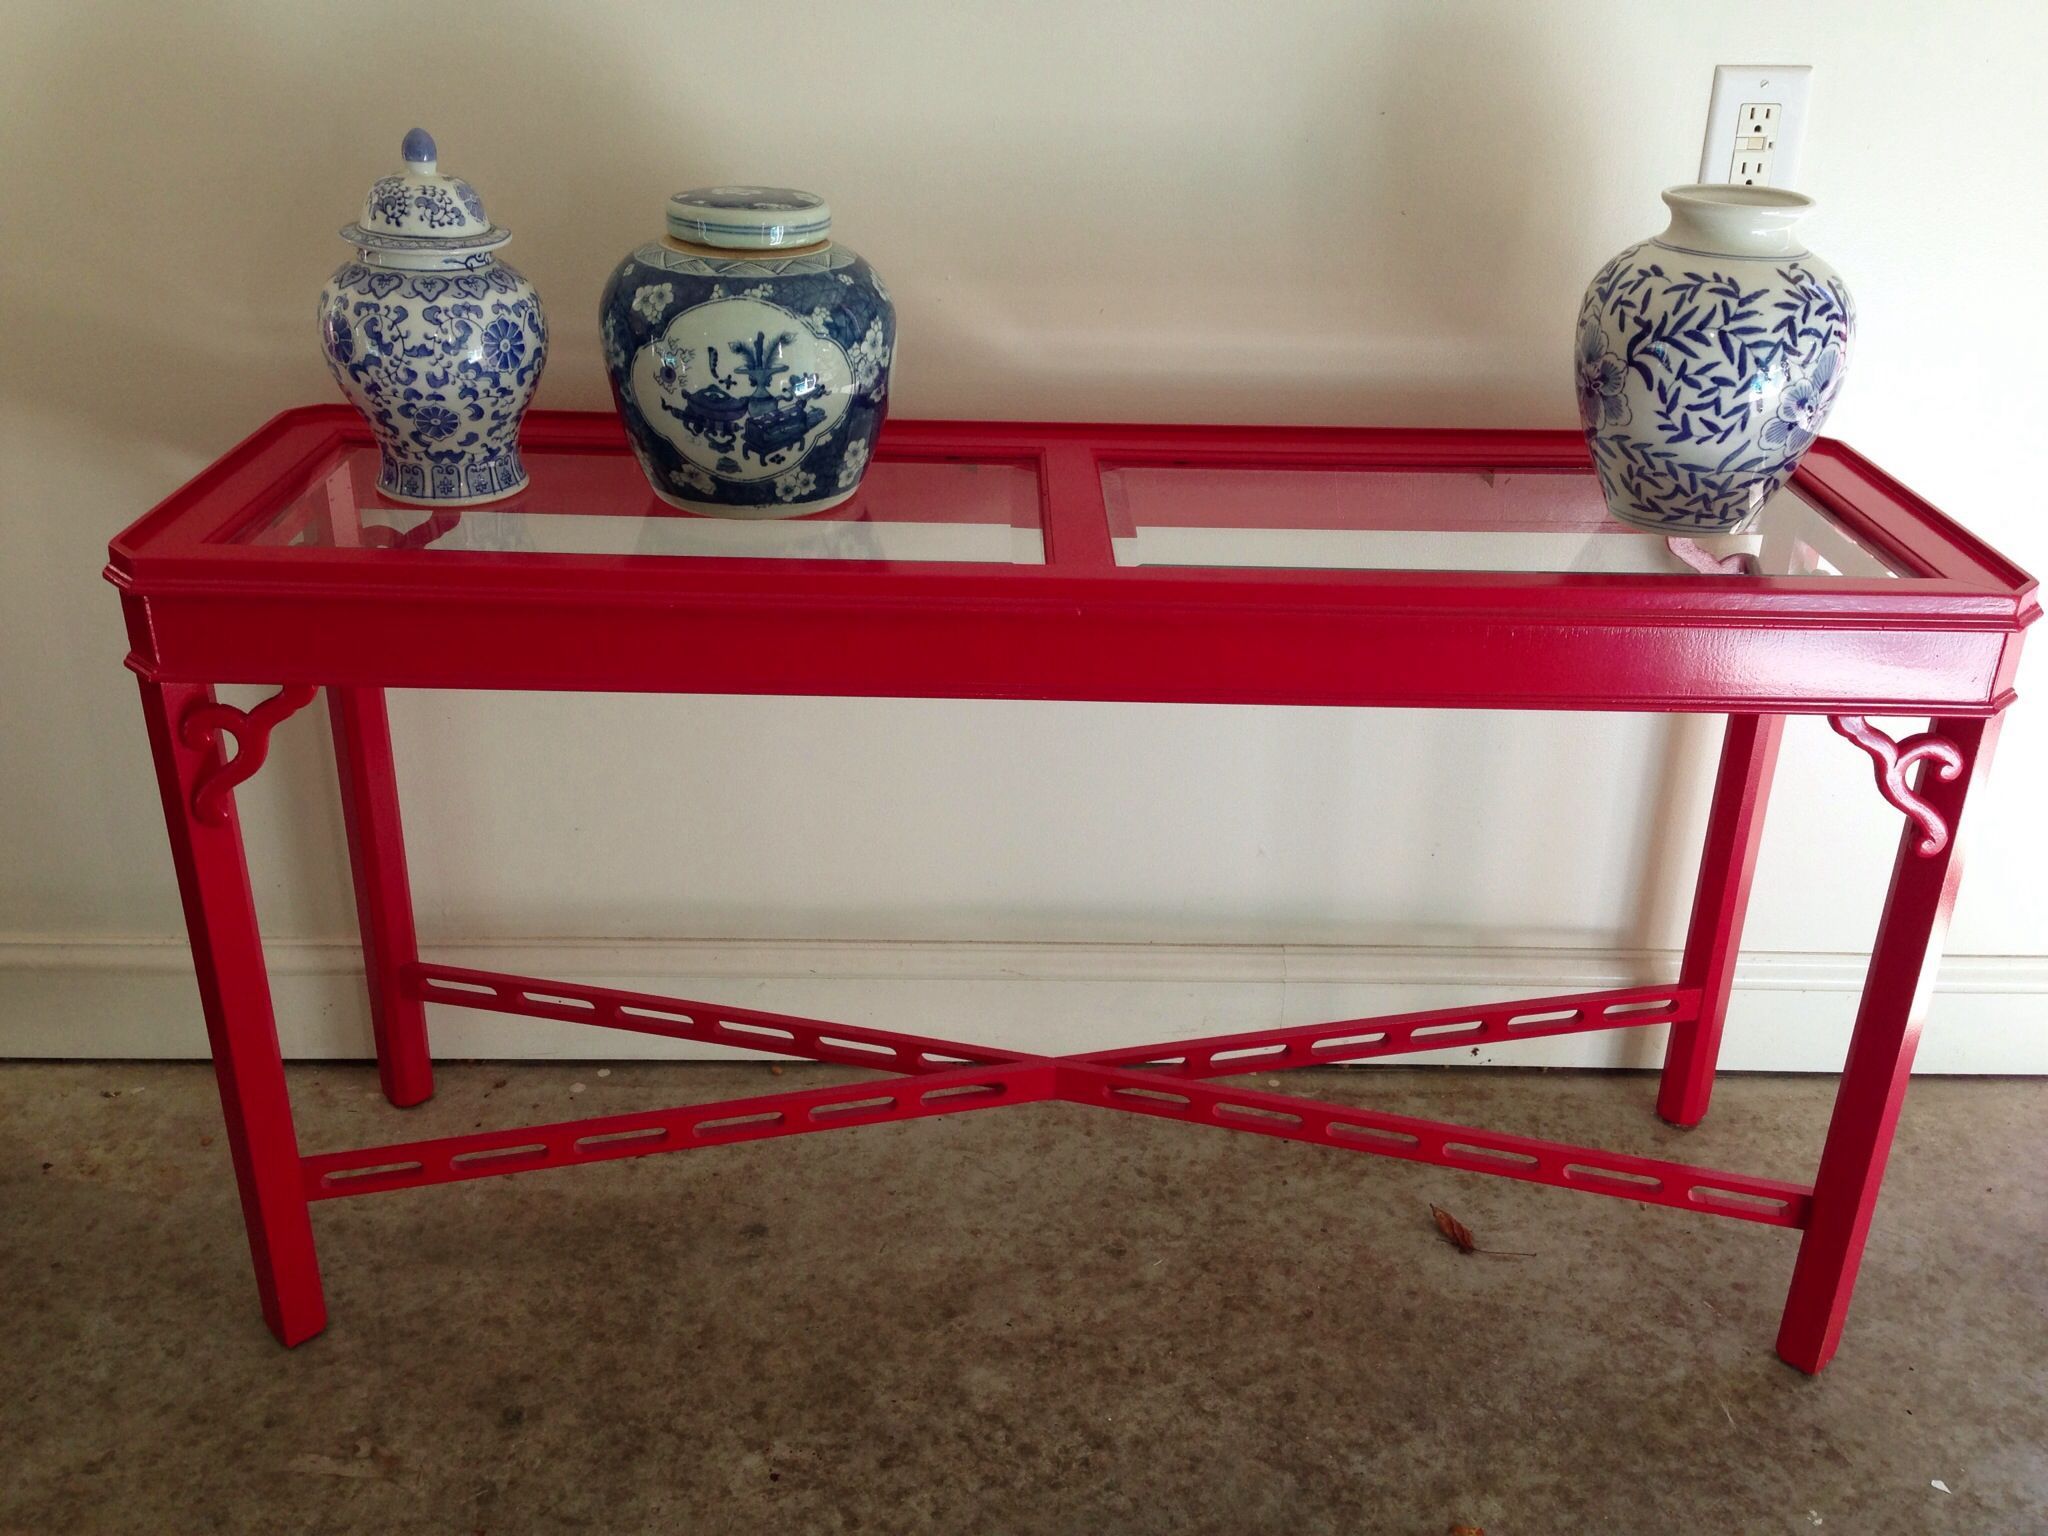 Red High Gloss Painted Sofa/console Table | Painted Sofa, High Gloss With White Grained Wood Hexagonal Console Tables (View 7 of 20)